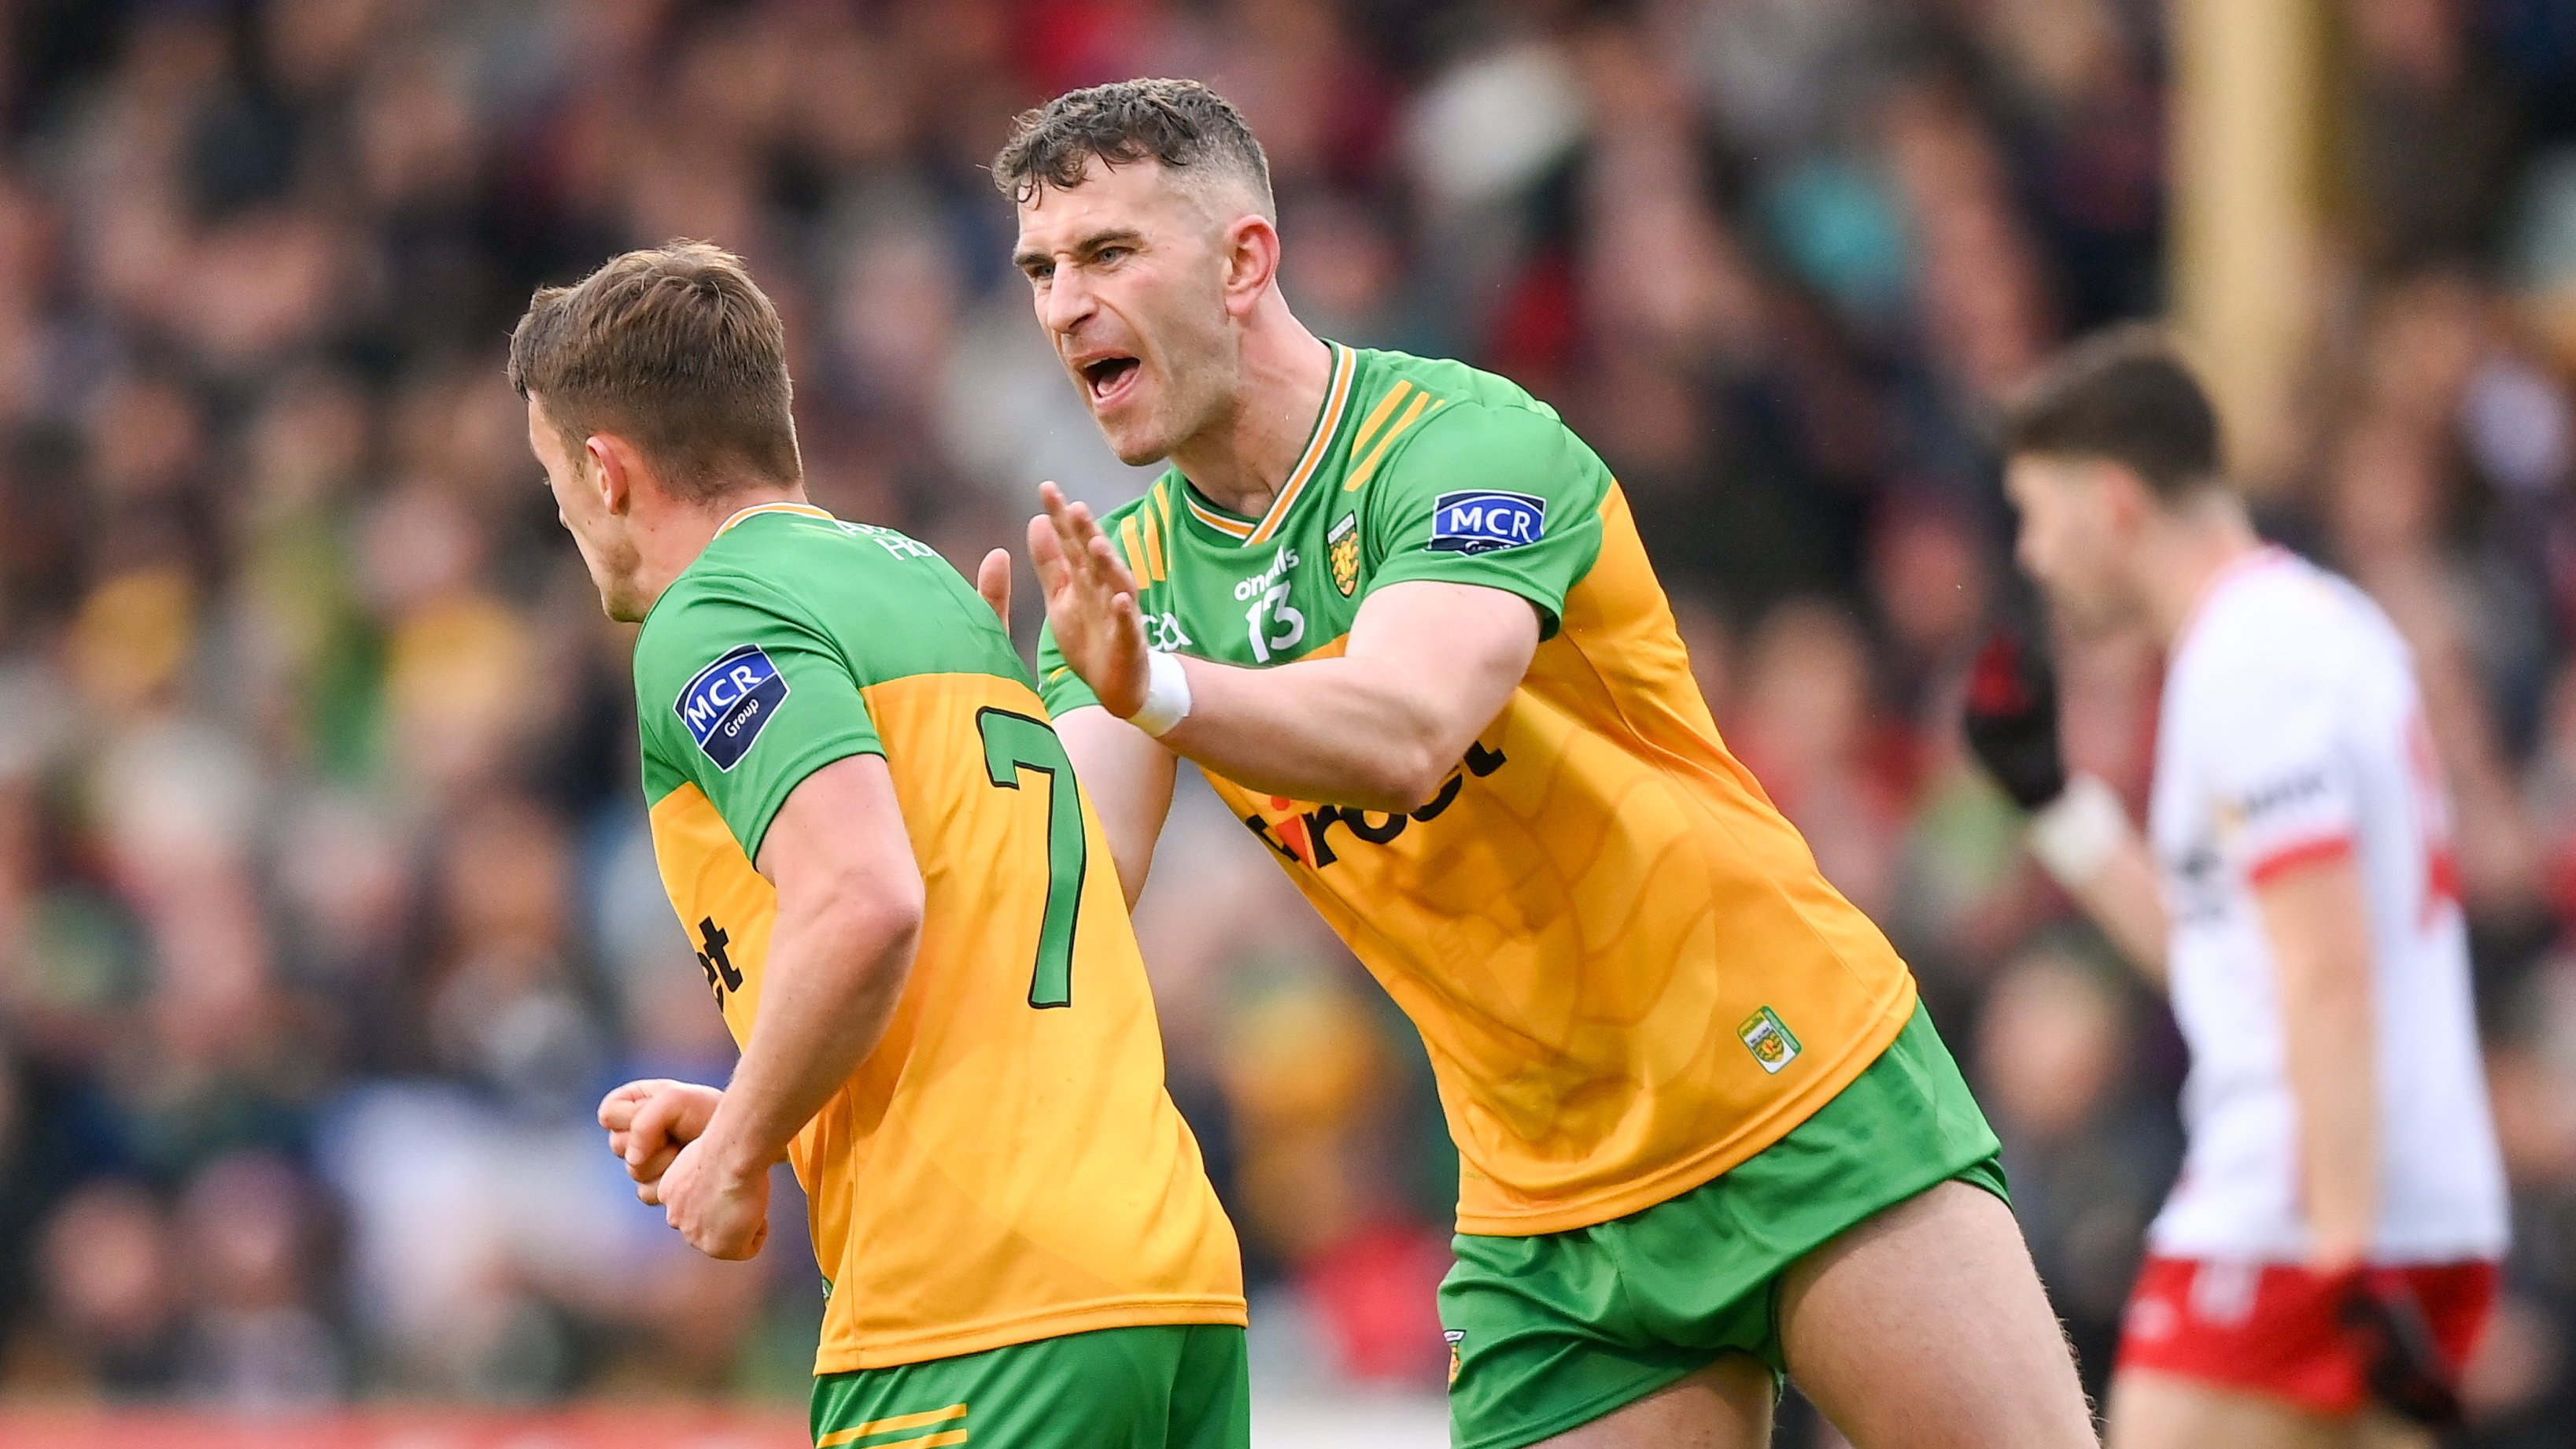 Patrick McBrearty congratulates Mogan, who scored three points for Donegal